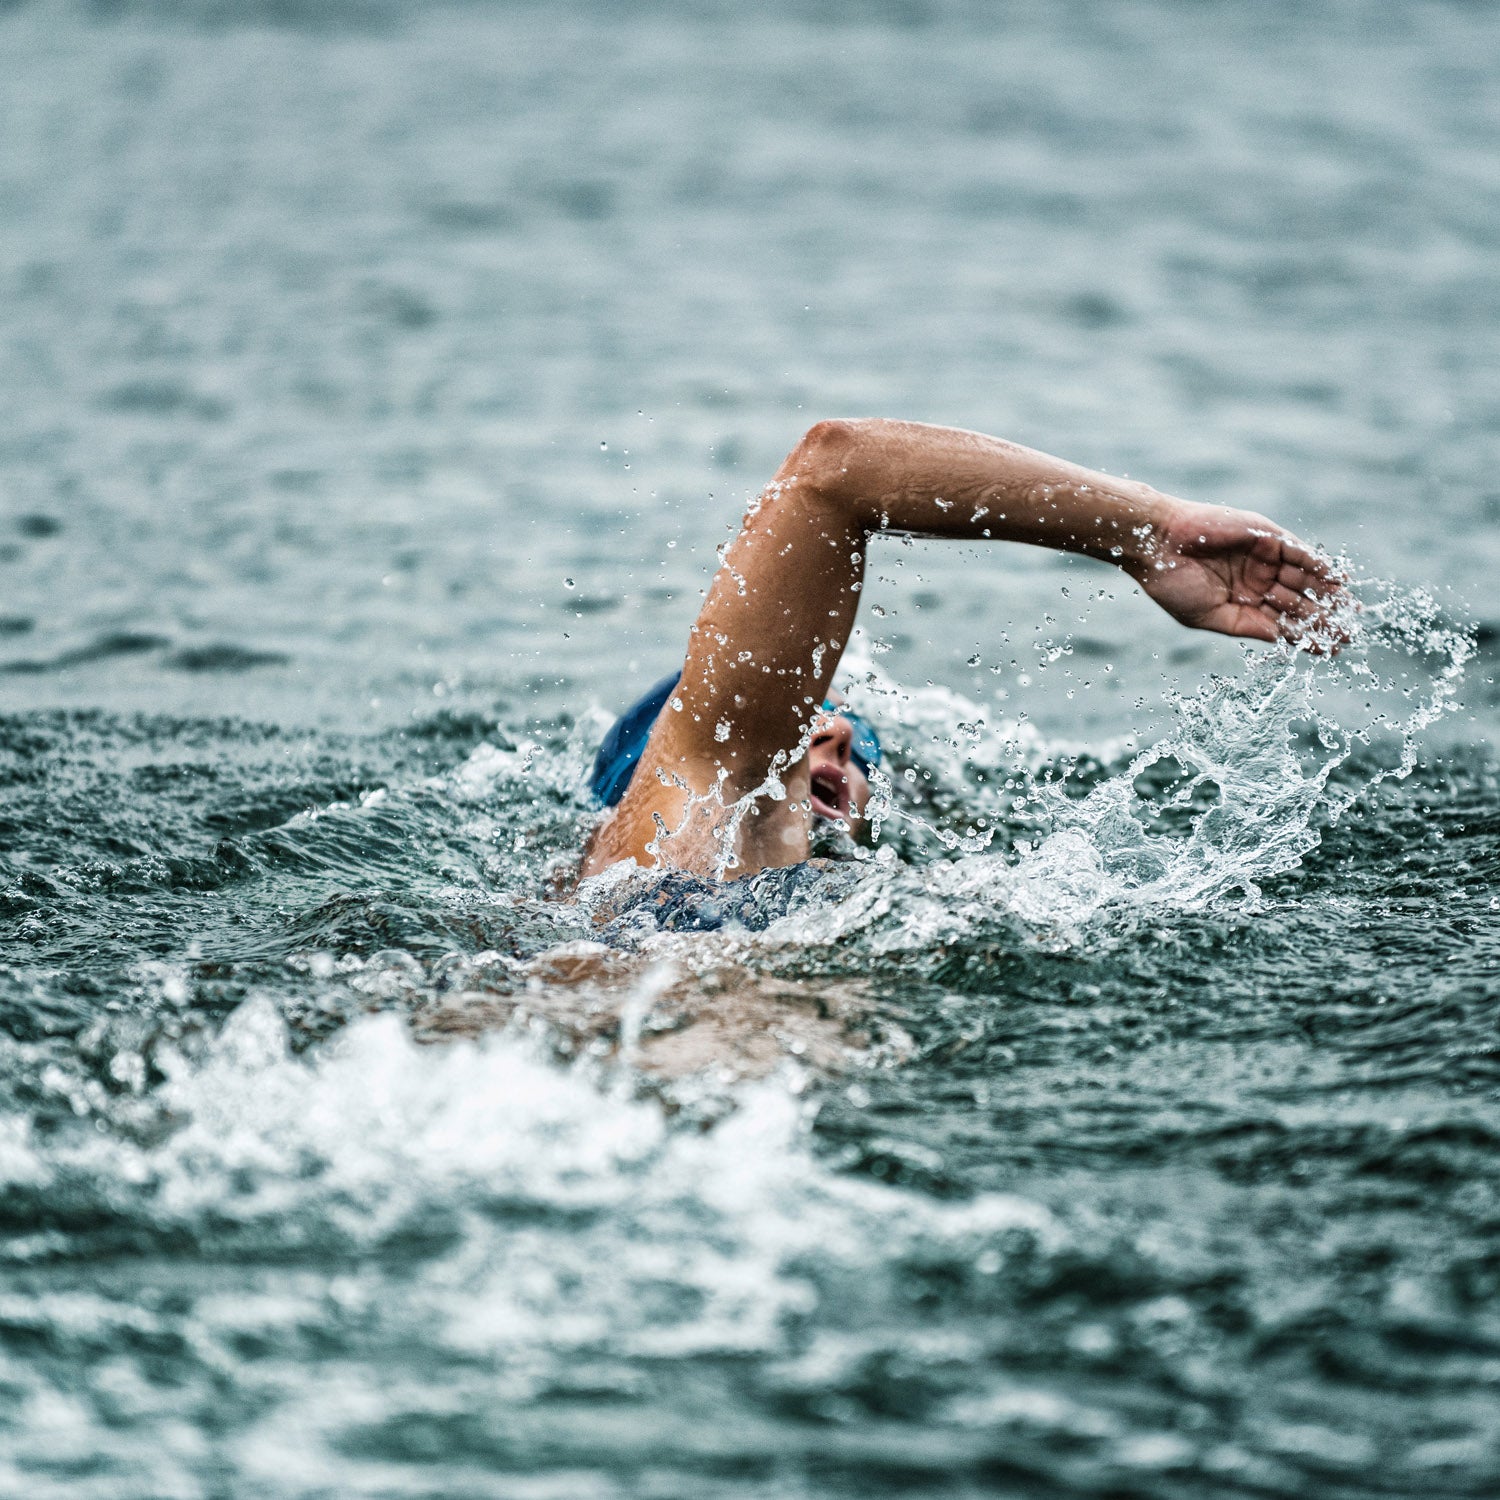 6 Essential Kit Items For Safe Open-Water Swimming